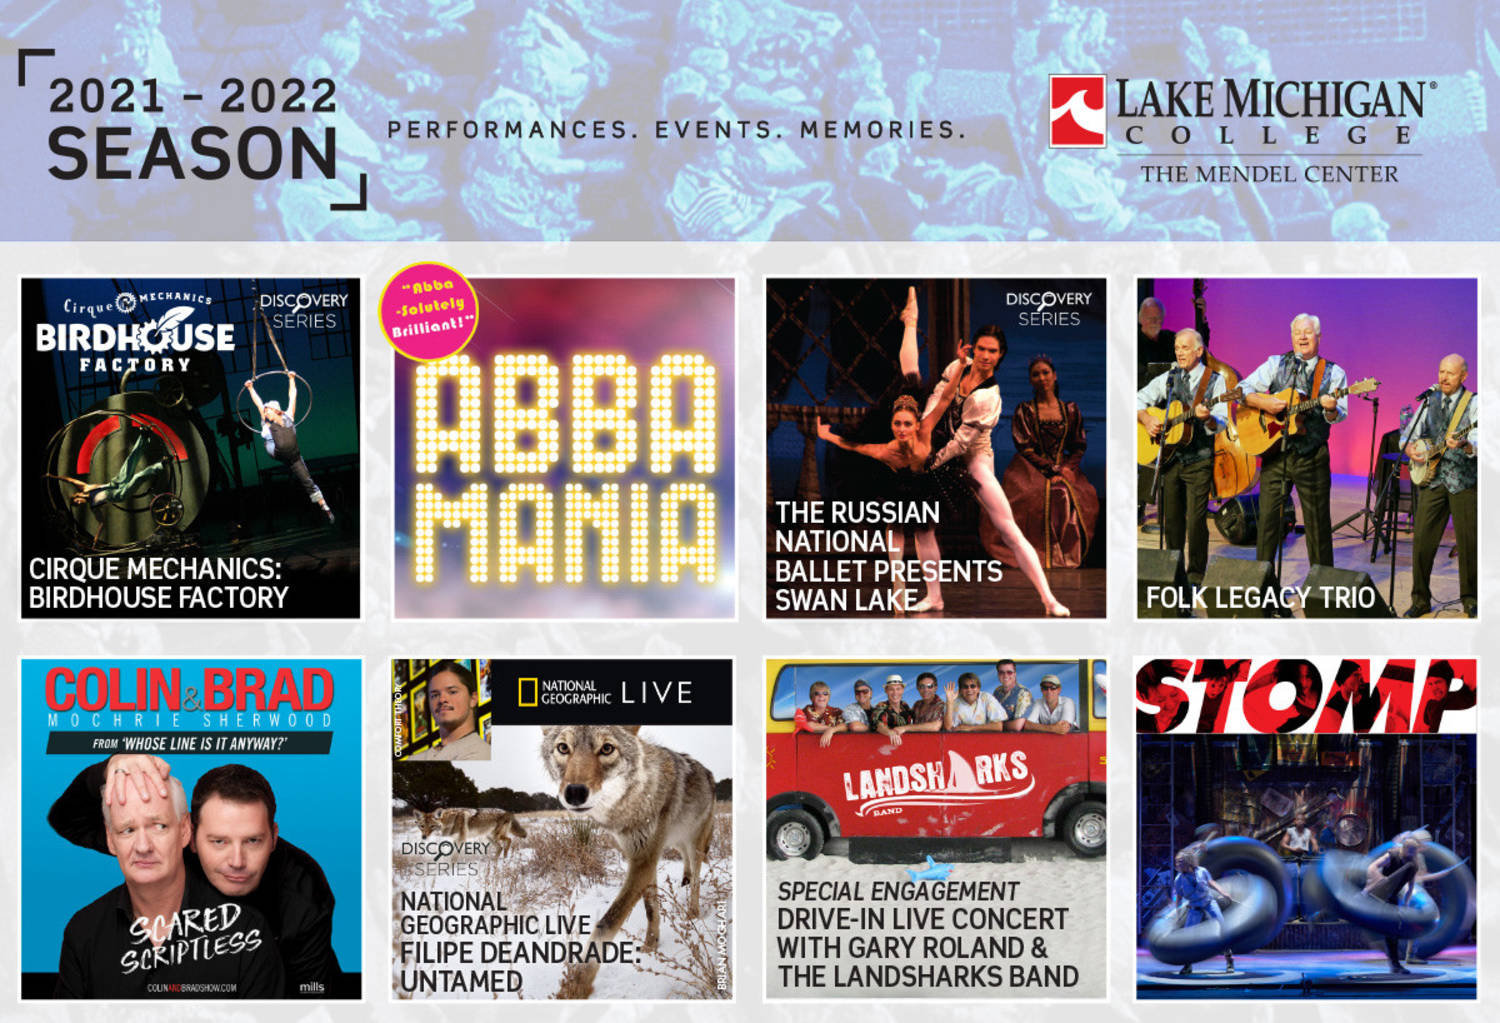 Tickets for Mendel Center 2021-22 season events on sale June 23